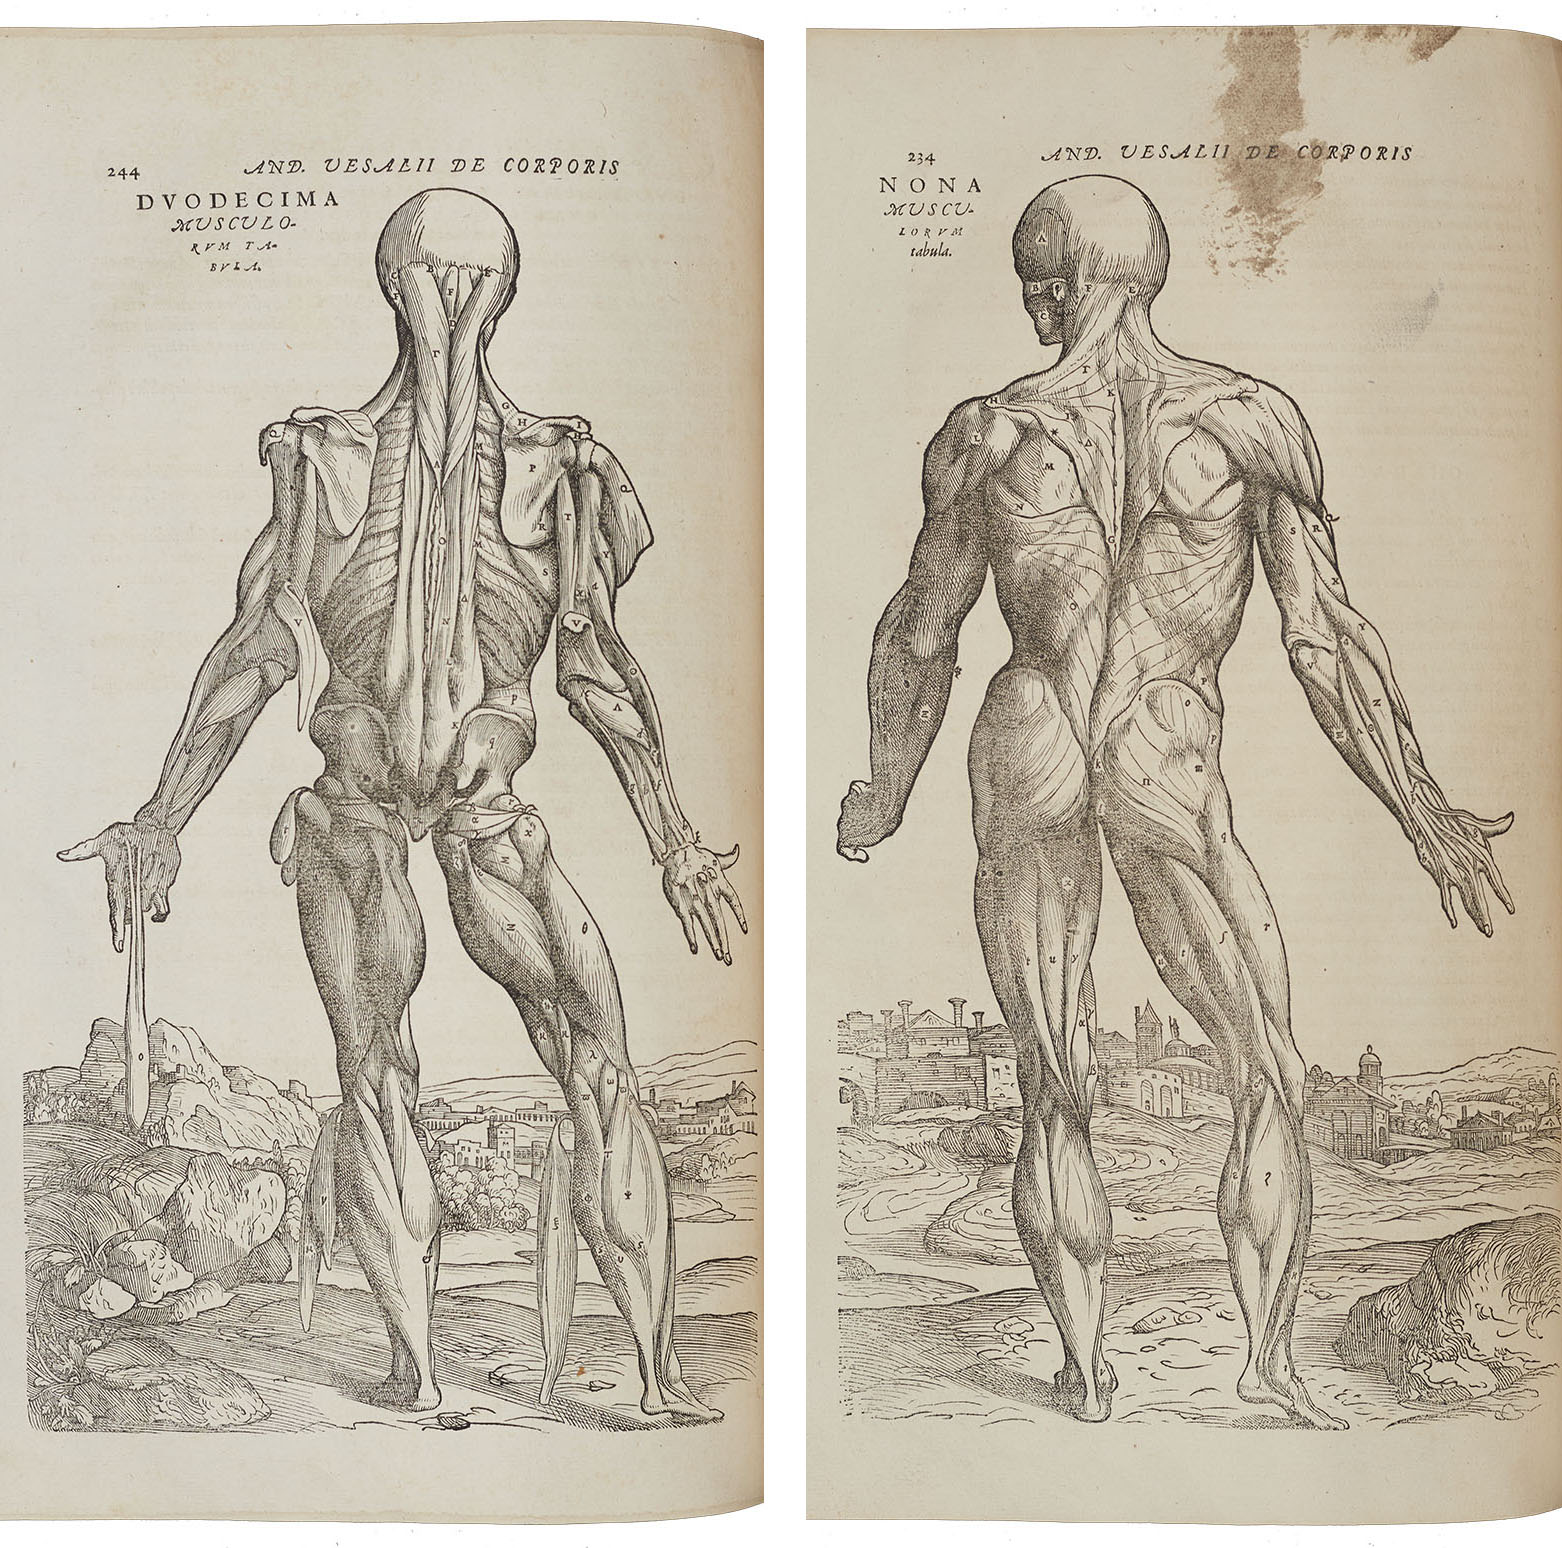 <p><strong>Left image</strong>: Observational anatomical drawing of a human. Due to it’s detailed accurate labelled drawings and accompanying text Vesalius’ ‘Fabric of the Human Body’ was a turning point in the history of medicine.</p>
<p><strong>Right image:</strong> Observational anatomical drawing of a human showing the skin removed and muscles below. Vesalius labelled all the detailed drawings and related it to text to help with learning anatomy of the human body. Vesalius had consecutive drawings completed to show each layer down to the skeleton.</p>
